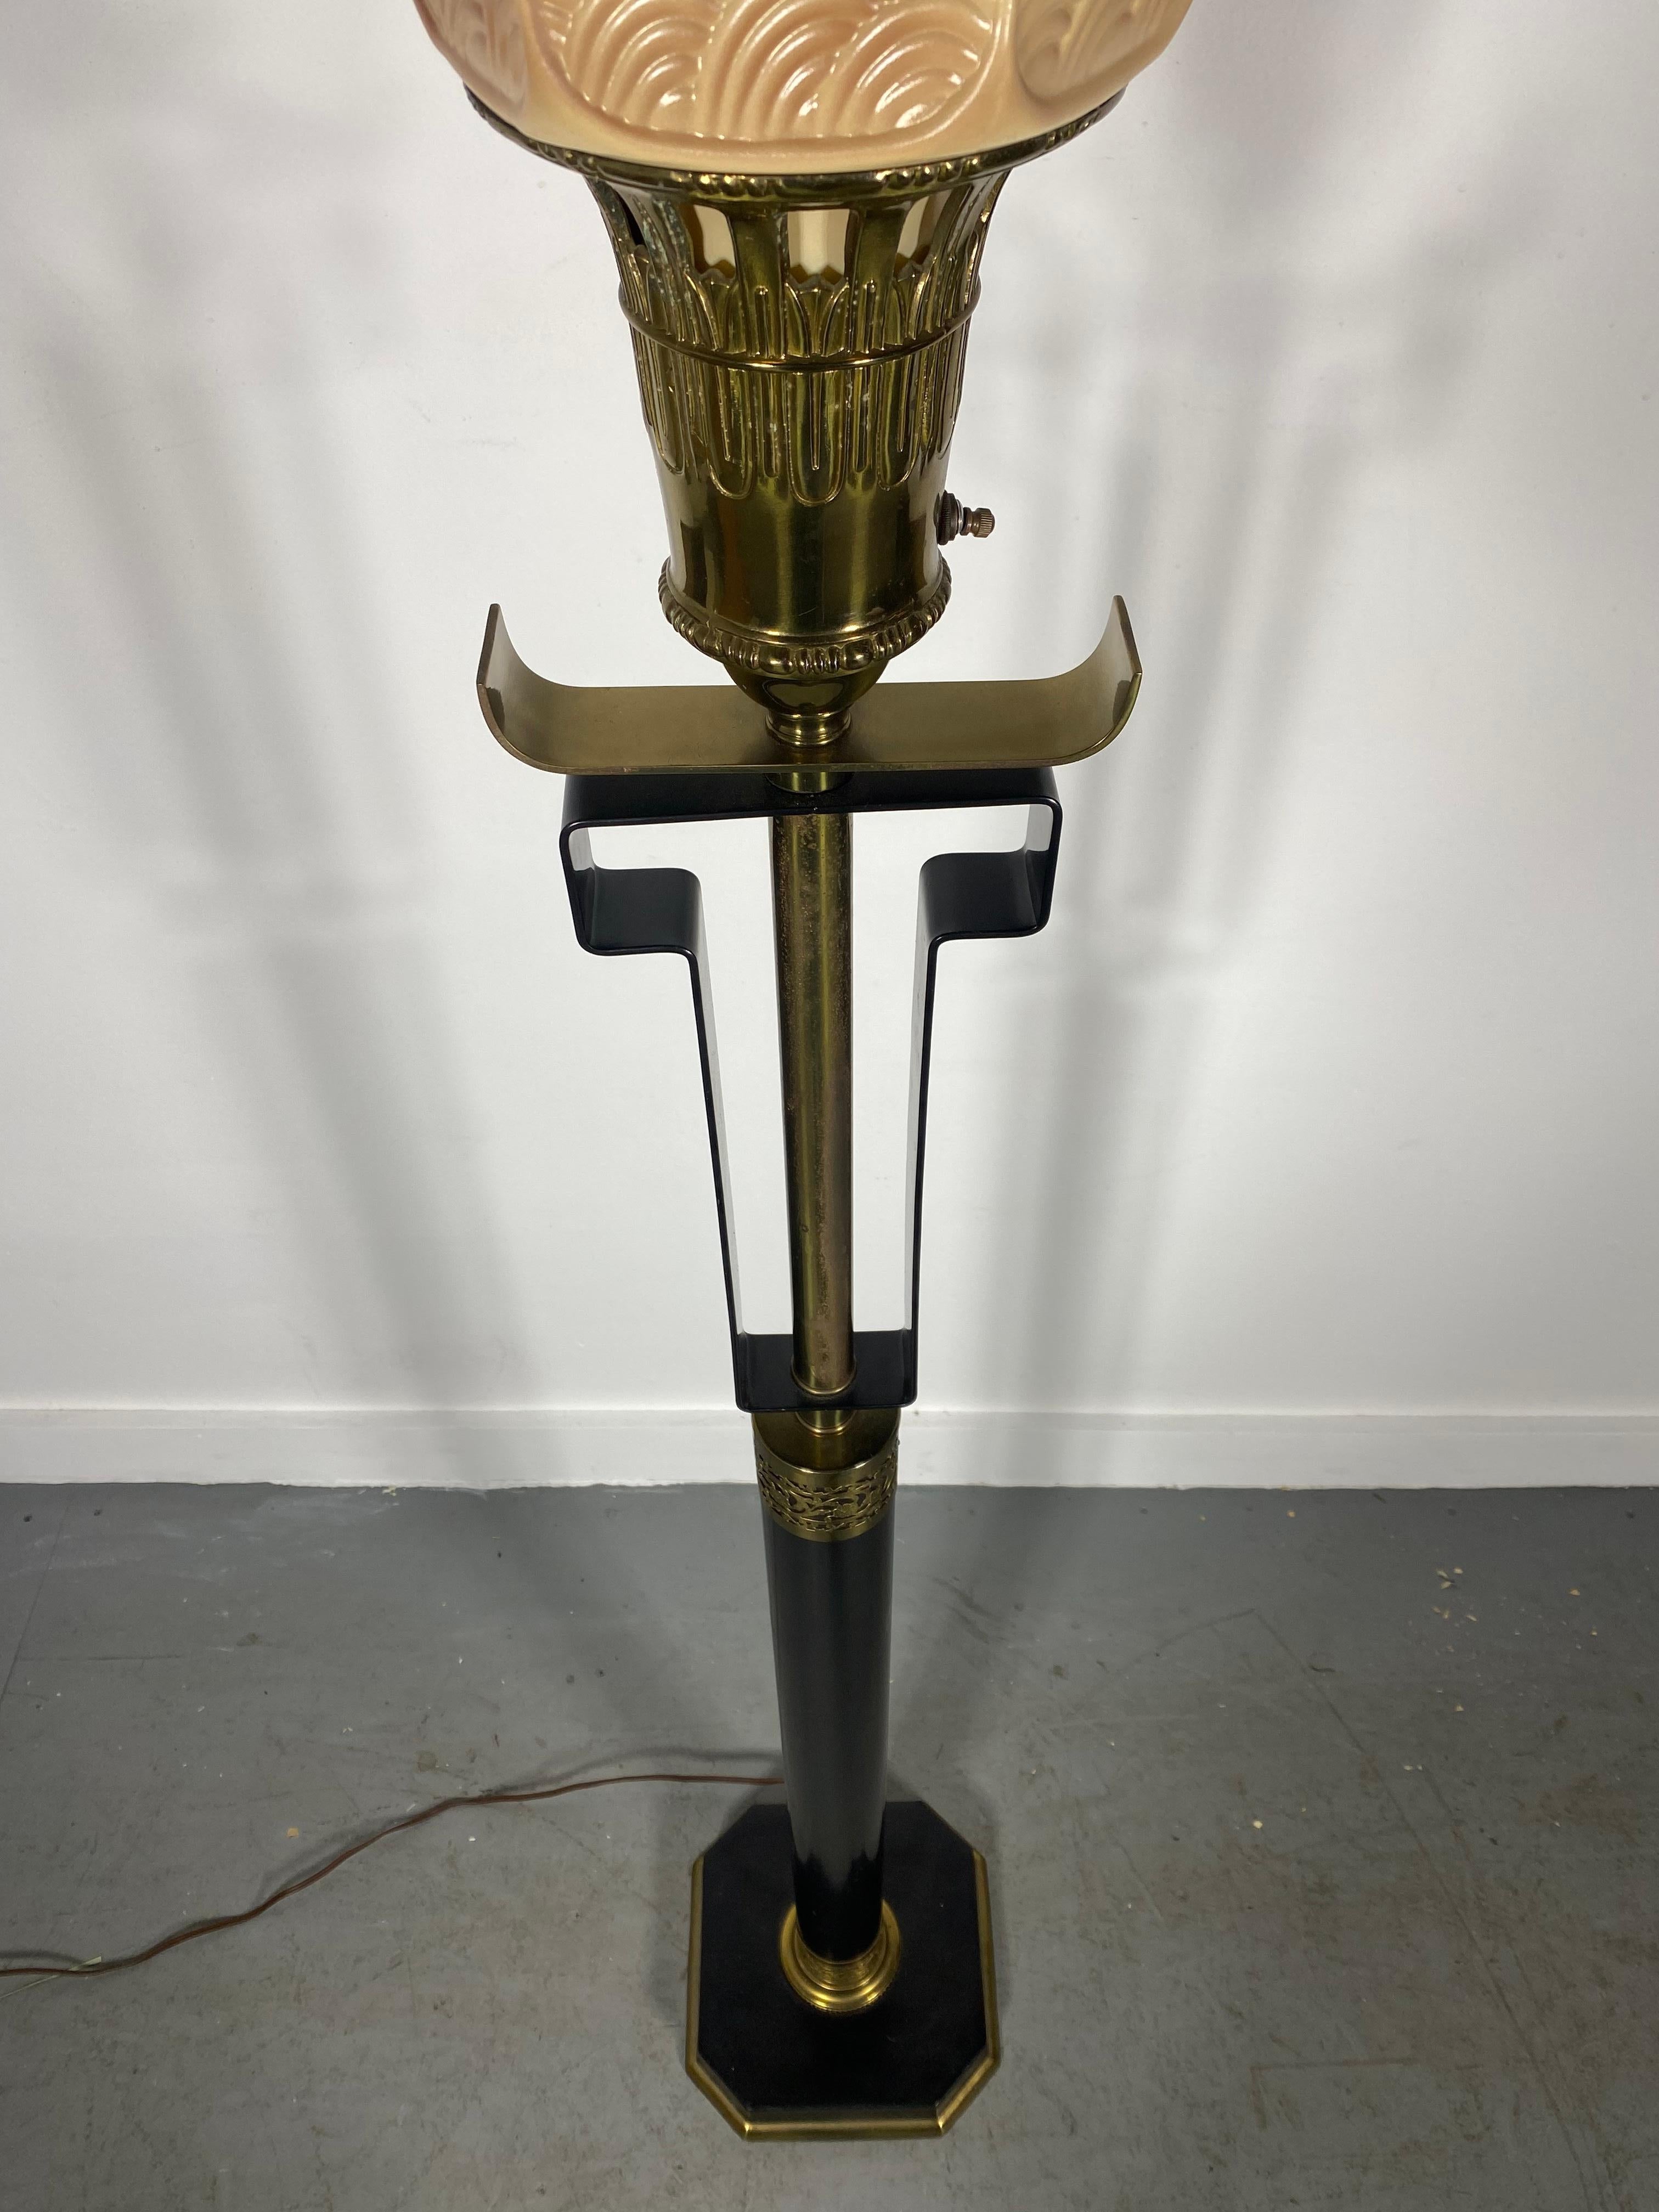 Asian Modernist Torchere / Floor Lamp, Attributed to James Mont, 1940s For Sale 1